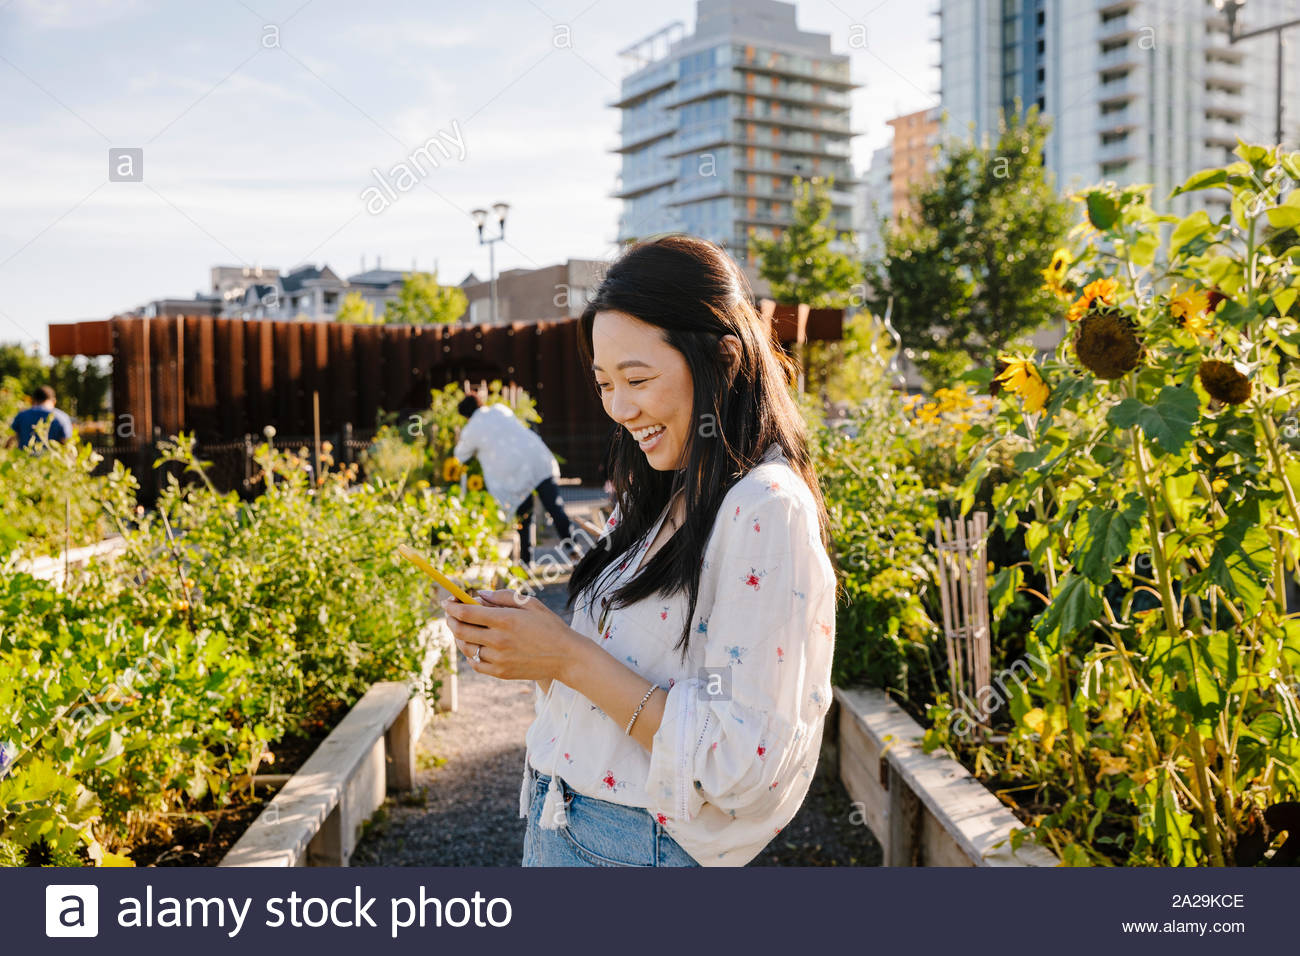 Happy young woman using smart phone in sunny, urban community garden Stock Photo